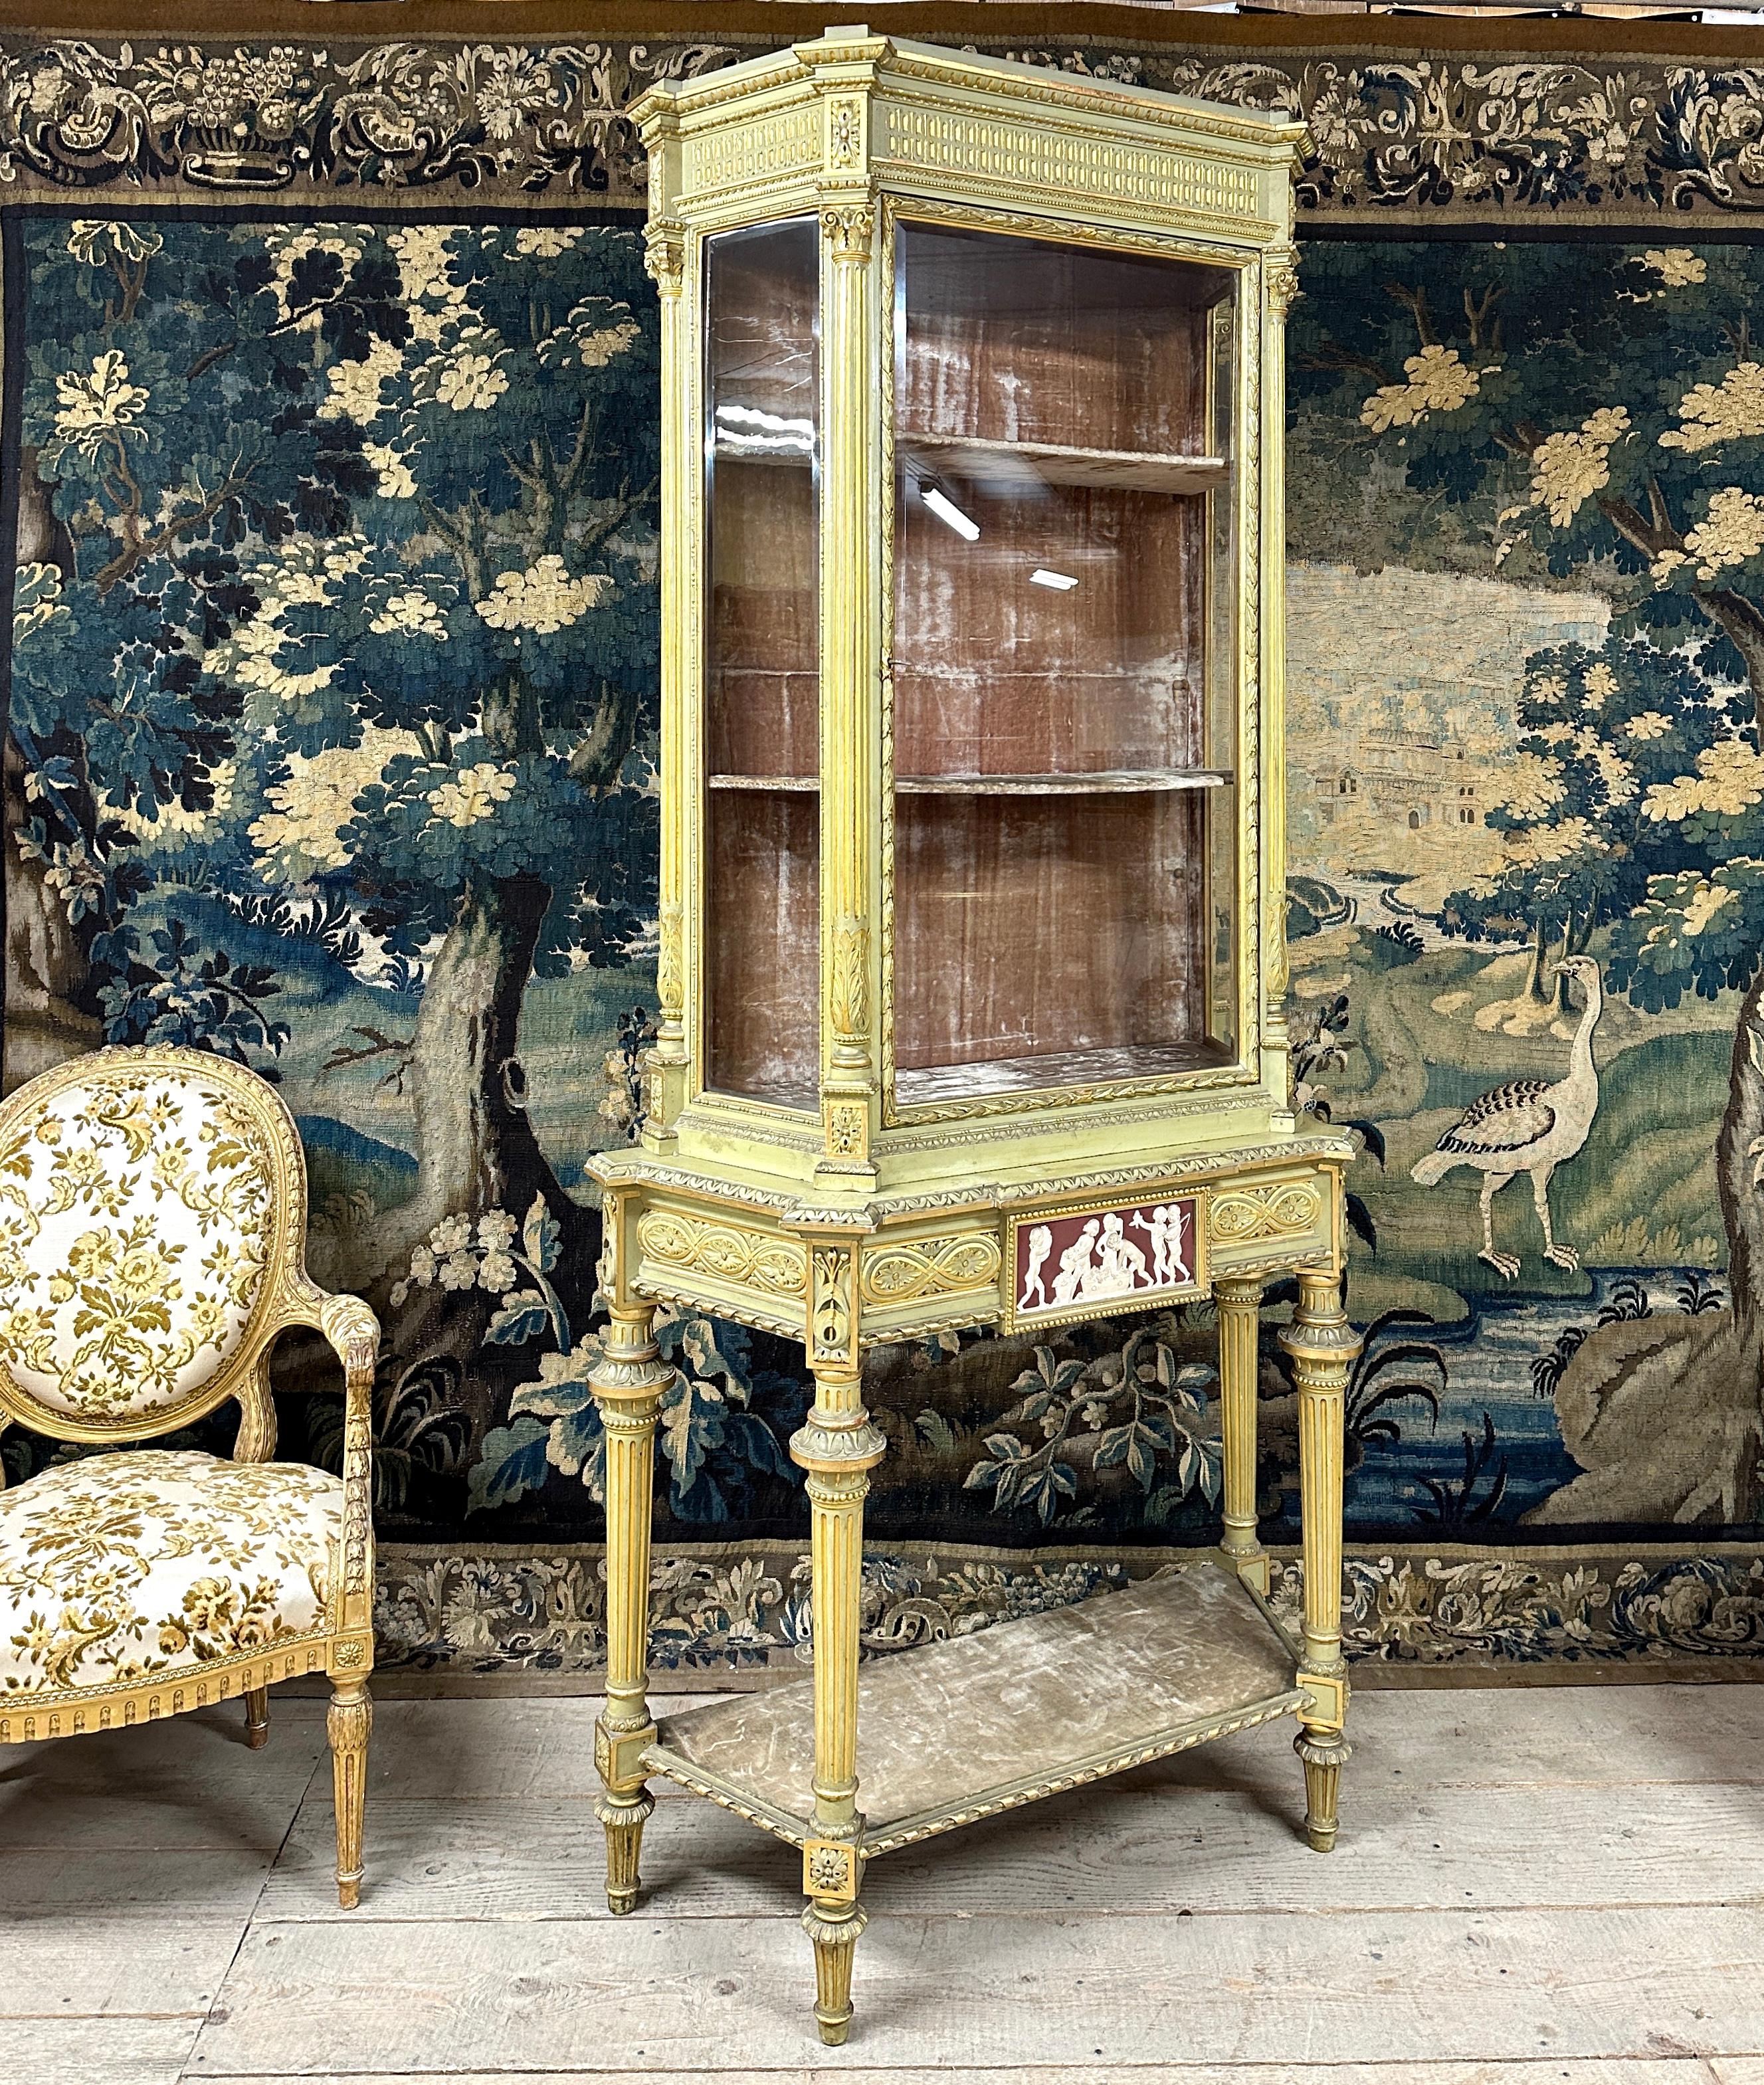 Large two-part Louis XVI style display case in green lacquered wood, gilt trim. Showcase made up of two parts with in the lower part a base decorated with a Wedgwood plaque in the belt, the upper part is glazed on all sides and opens with a central